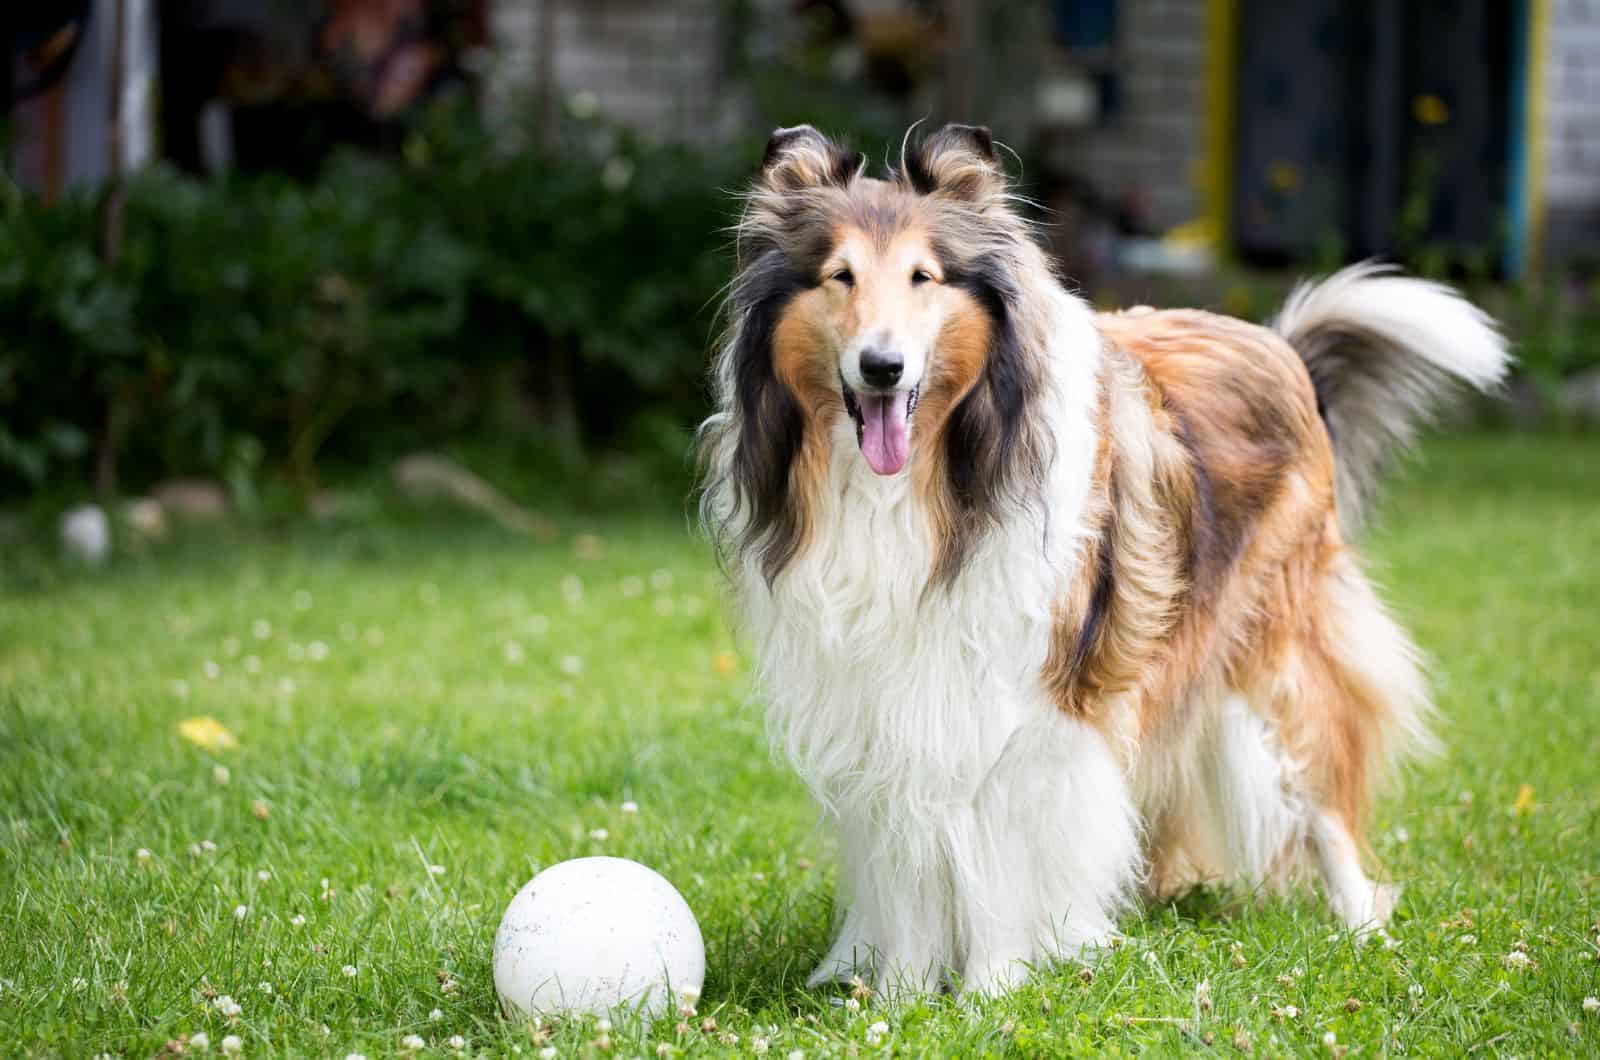 Rough Collie playing with ball